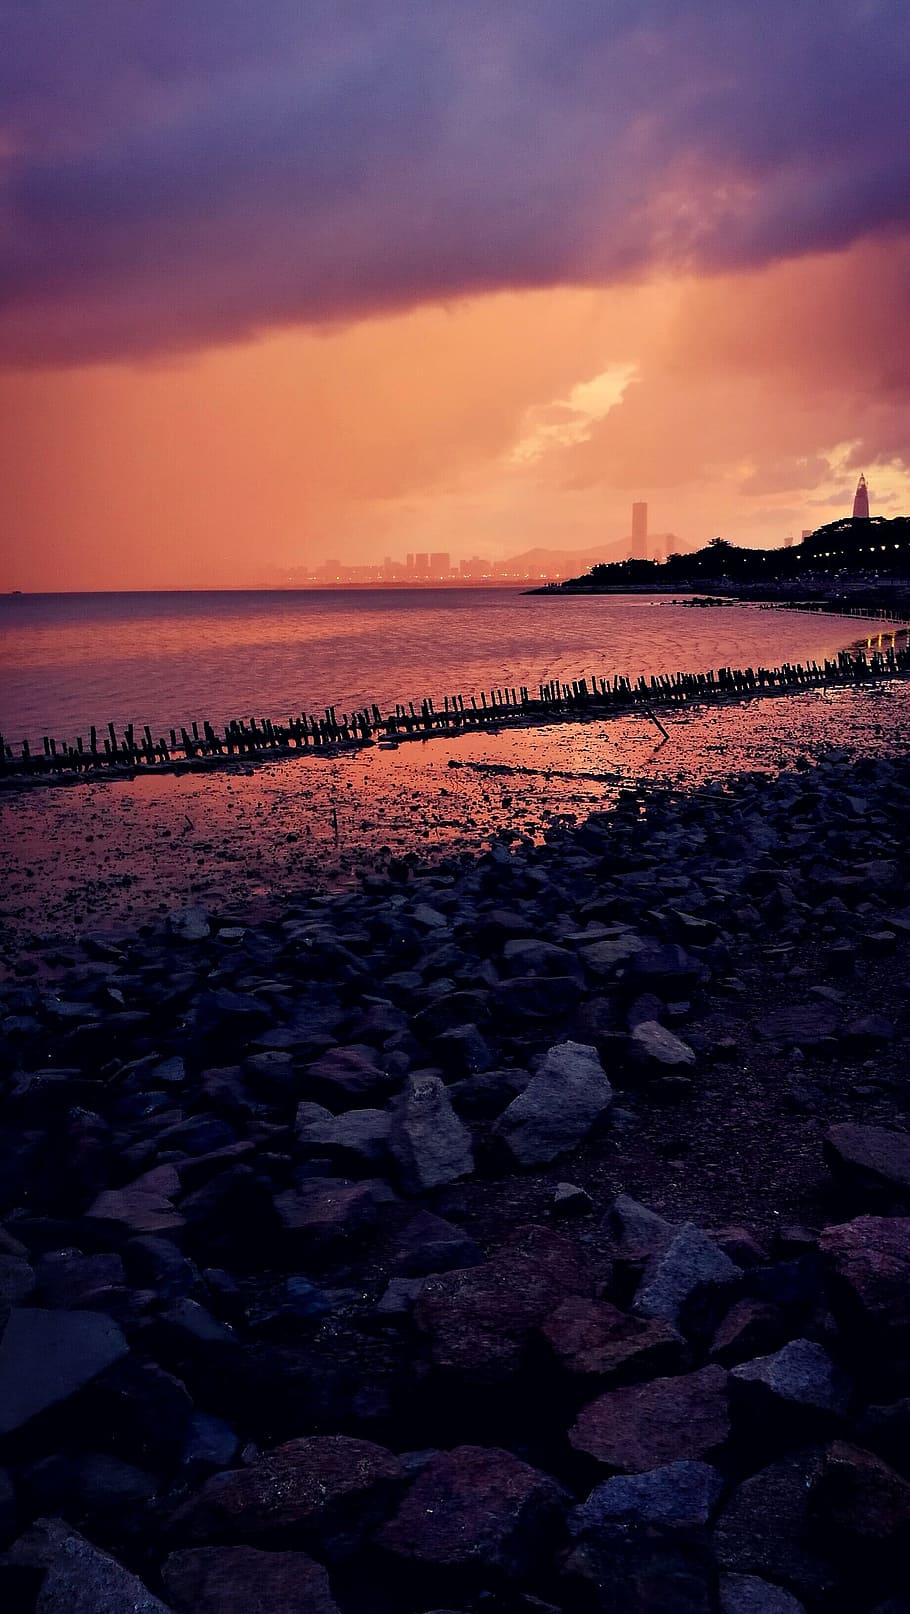 sunset, shenzhen bay, rainstorm, sky, water, scenics - nature, beauty in nature, tranquil scene, tranquility, sea